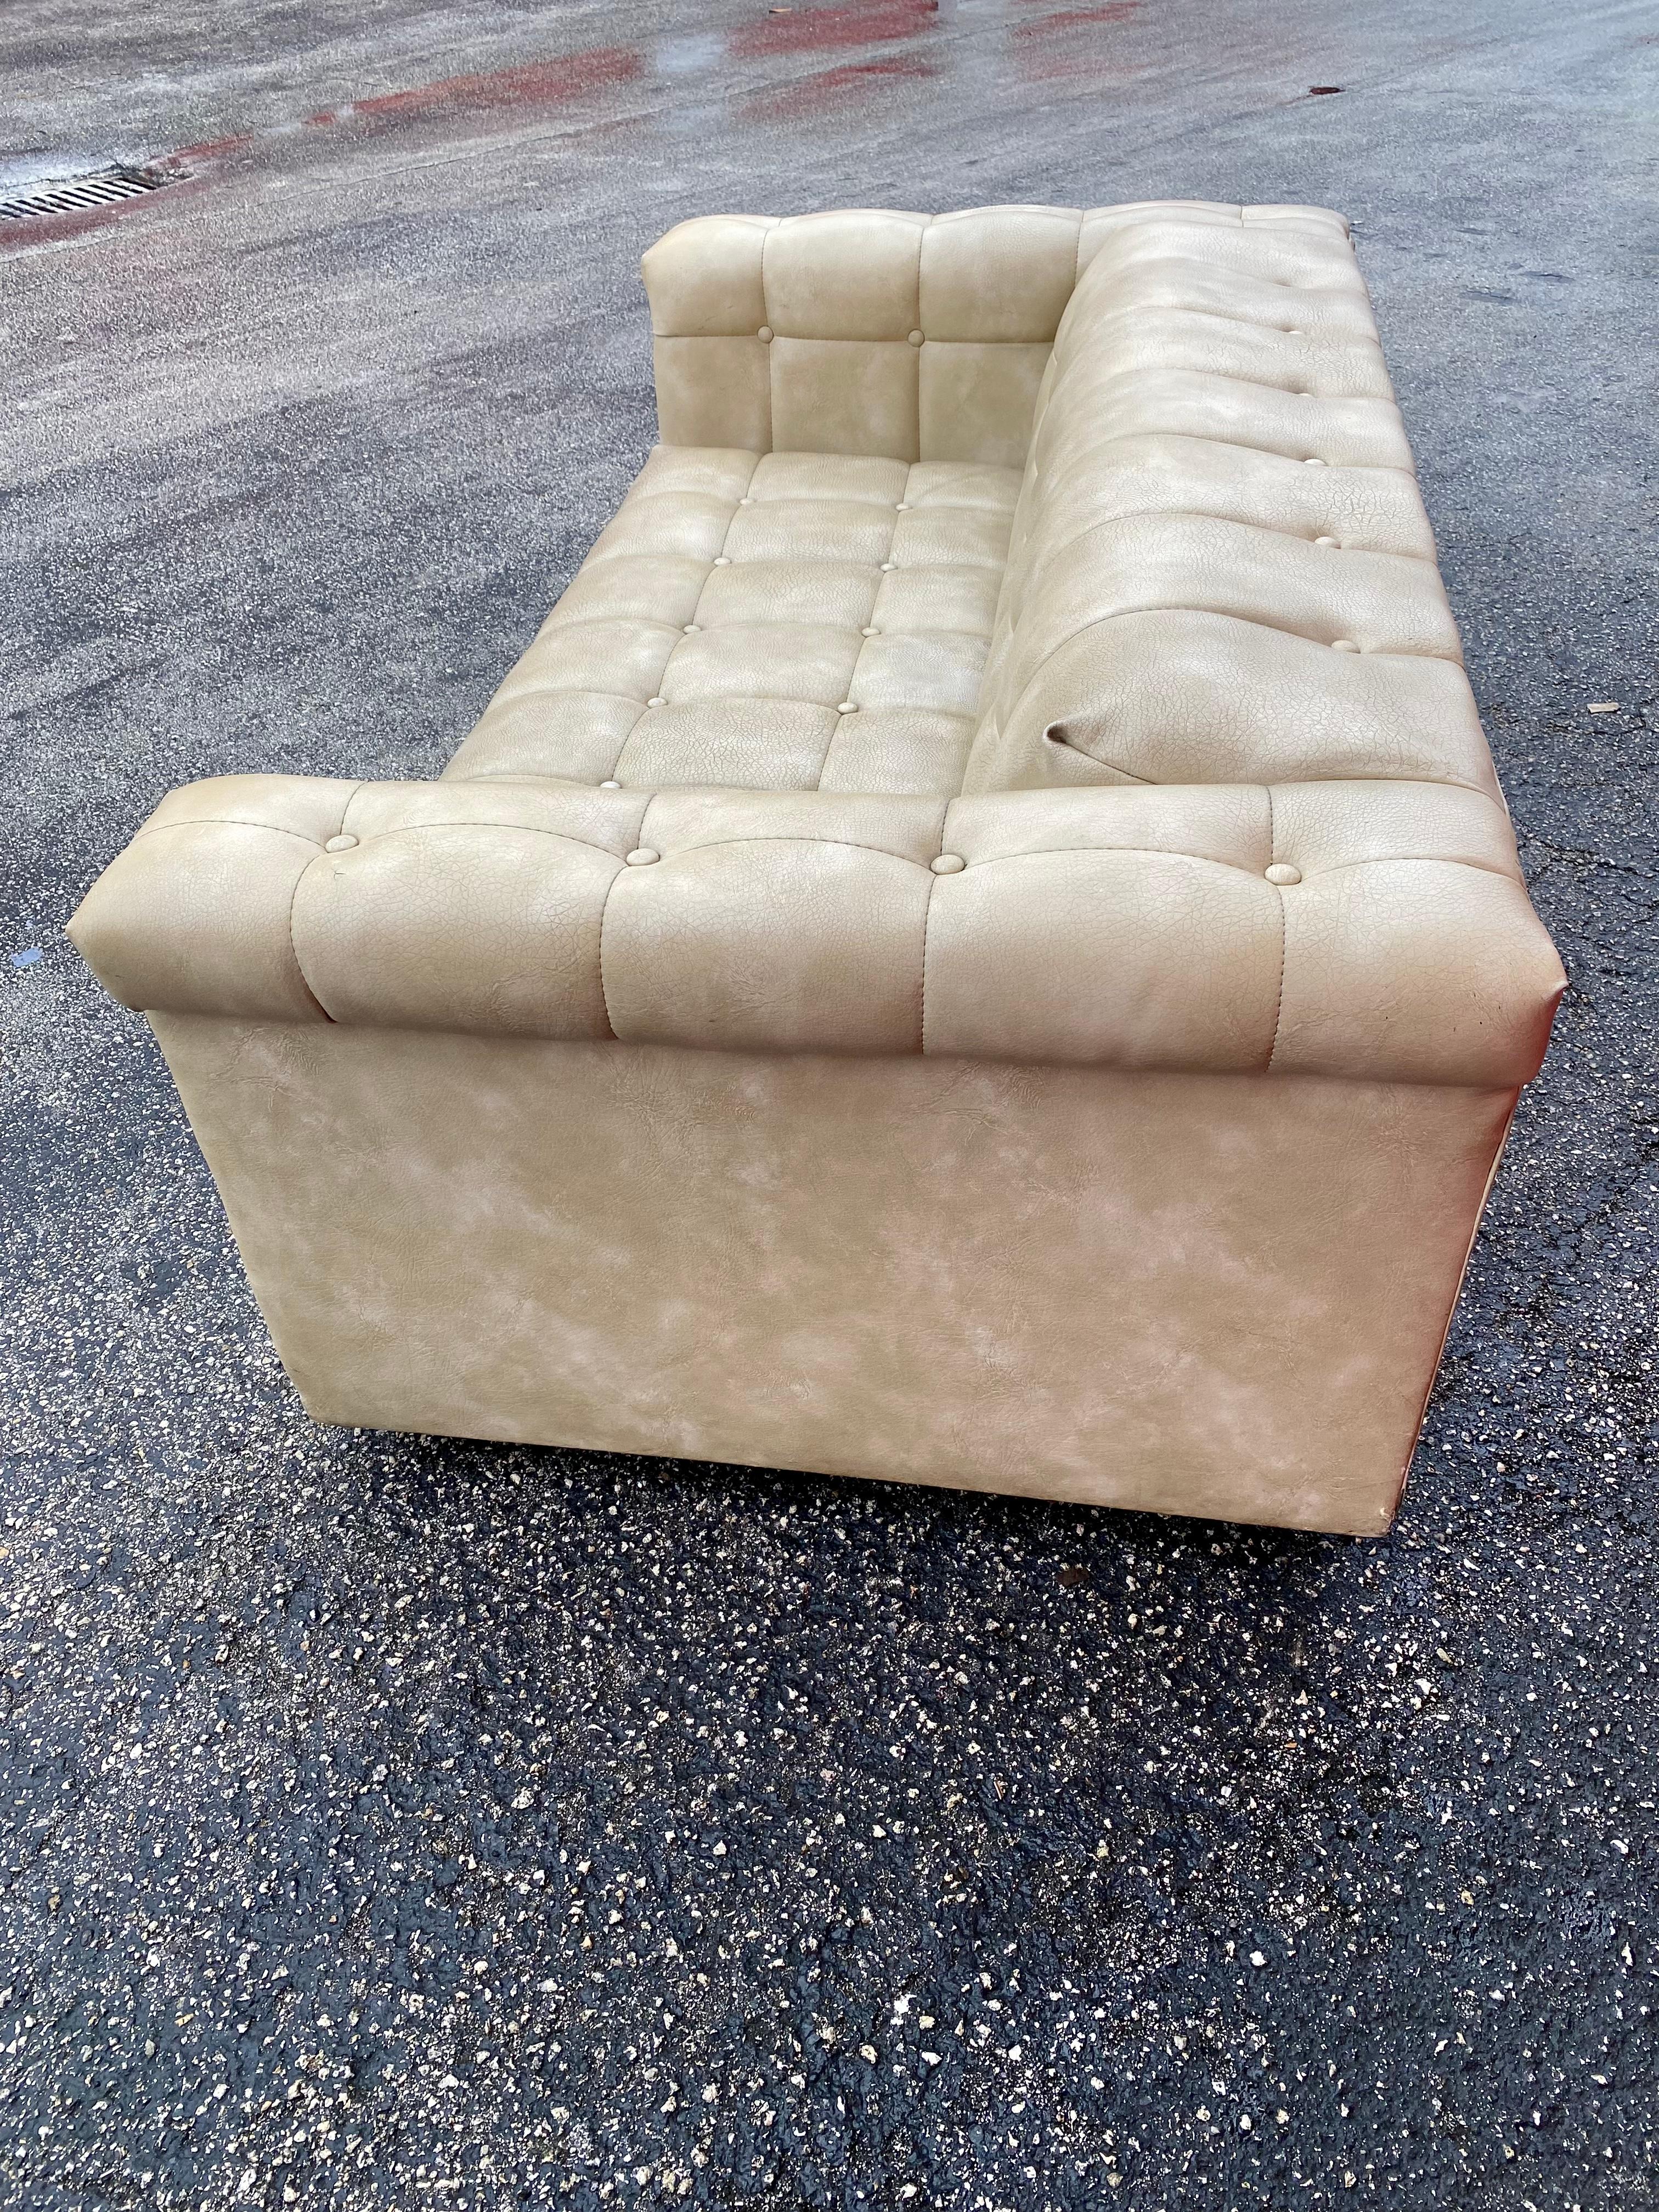 1960s Milo Baughman Style Button-Tufted Biscuit Distressed Sofa For Sale 2